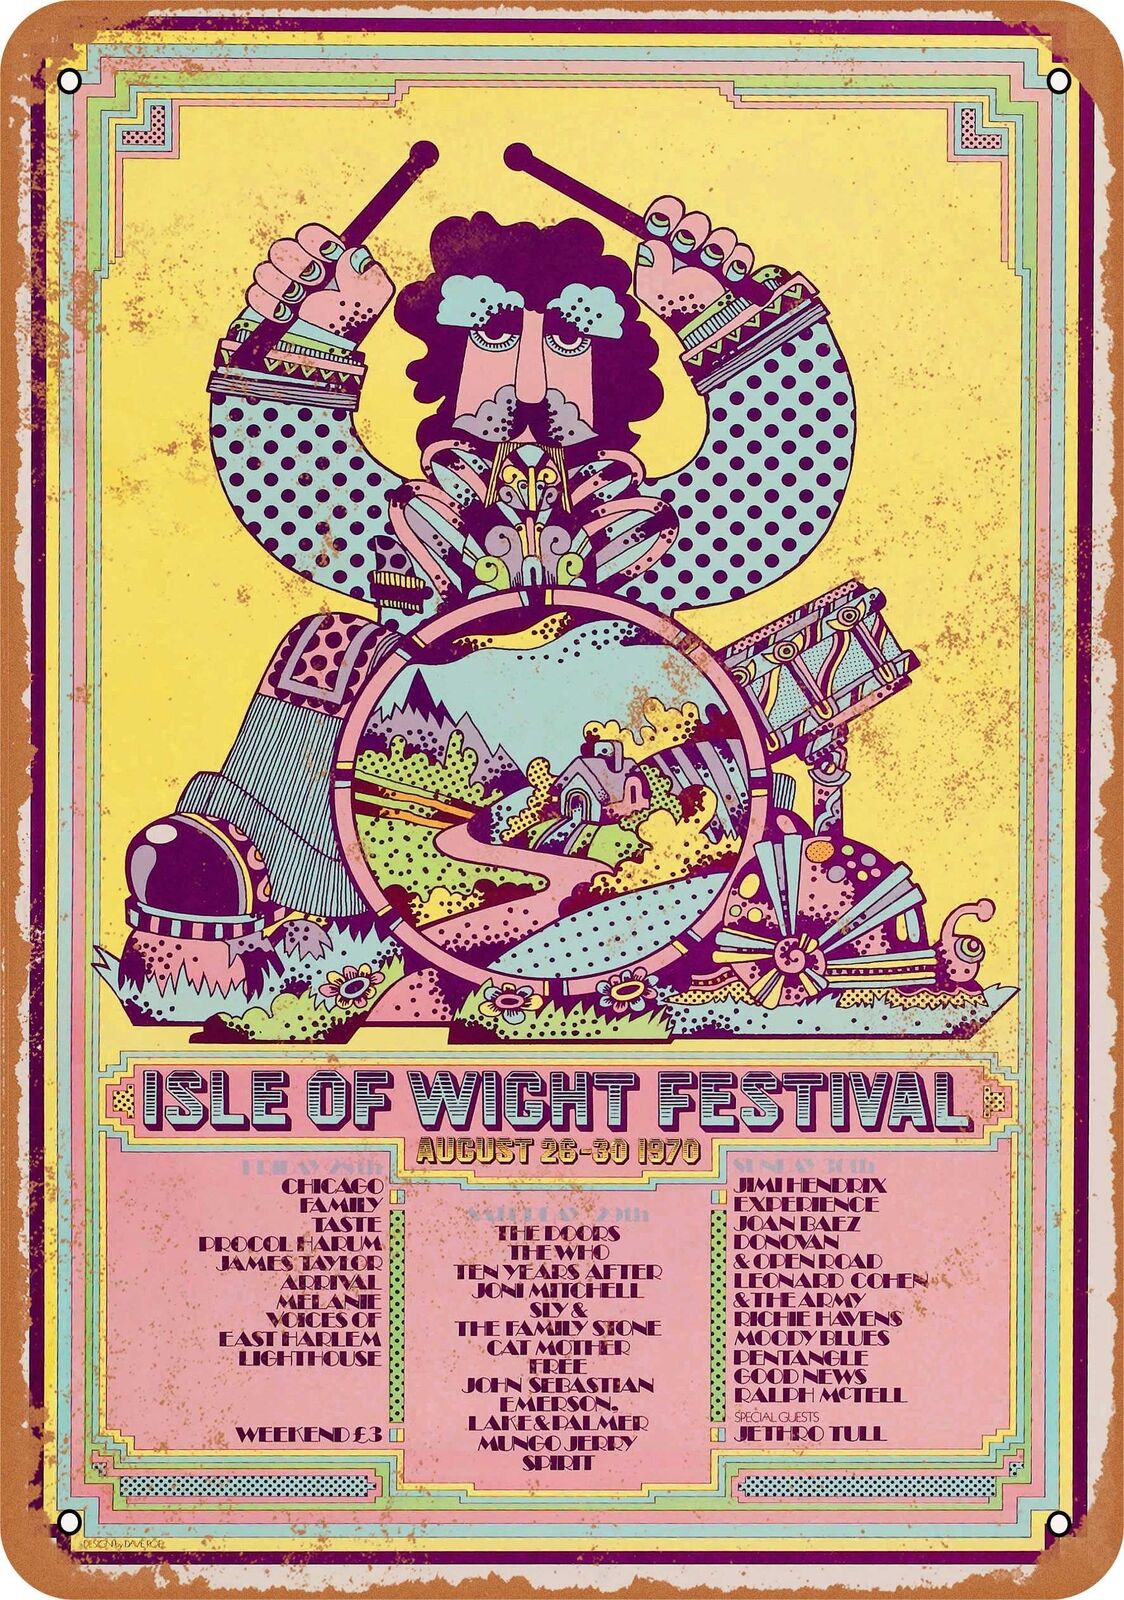 Metal Sign - 1970 Isle of Wight Festival - Vintage Look Reproduction